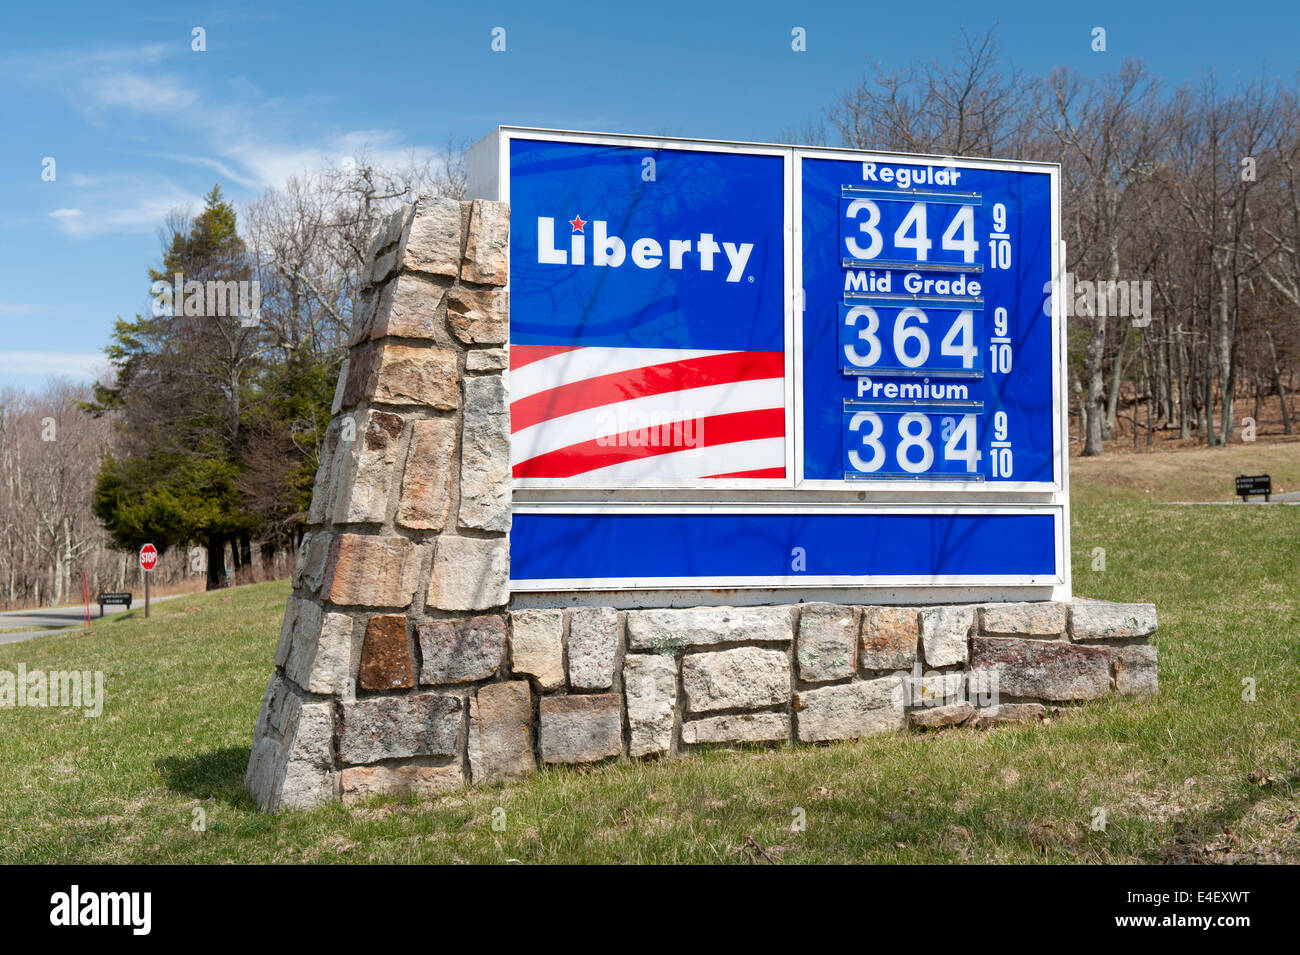 Gasoline price sign at a Liberty gas station in Virginia, USA. Stock Photo